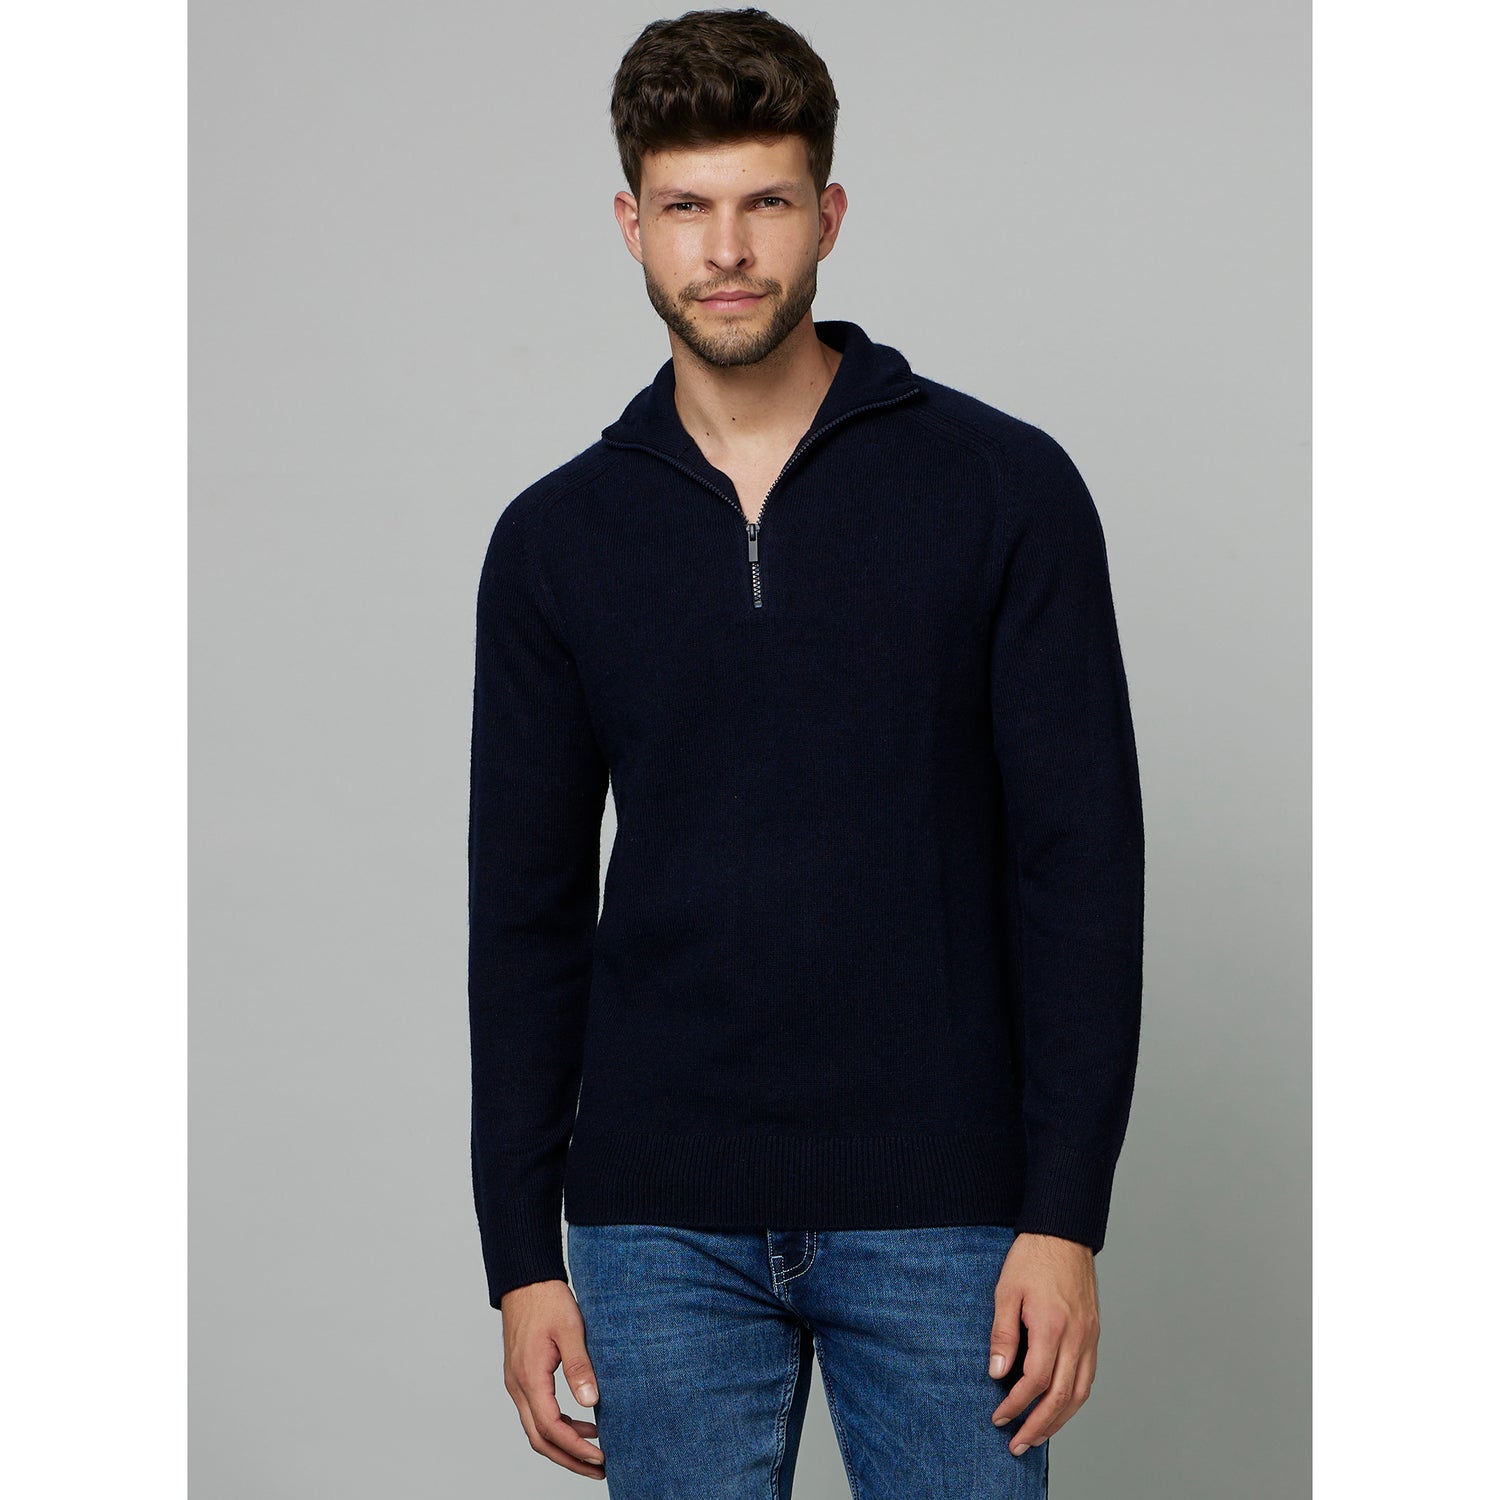 Navy Blue Mock Colar Cotton Pullover Sweater (CEWOOLCAM)